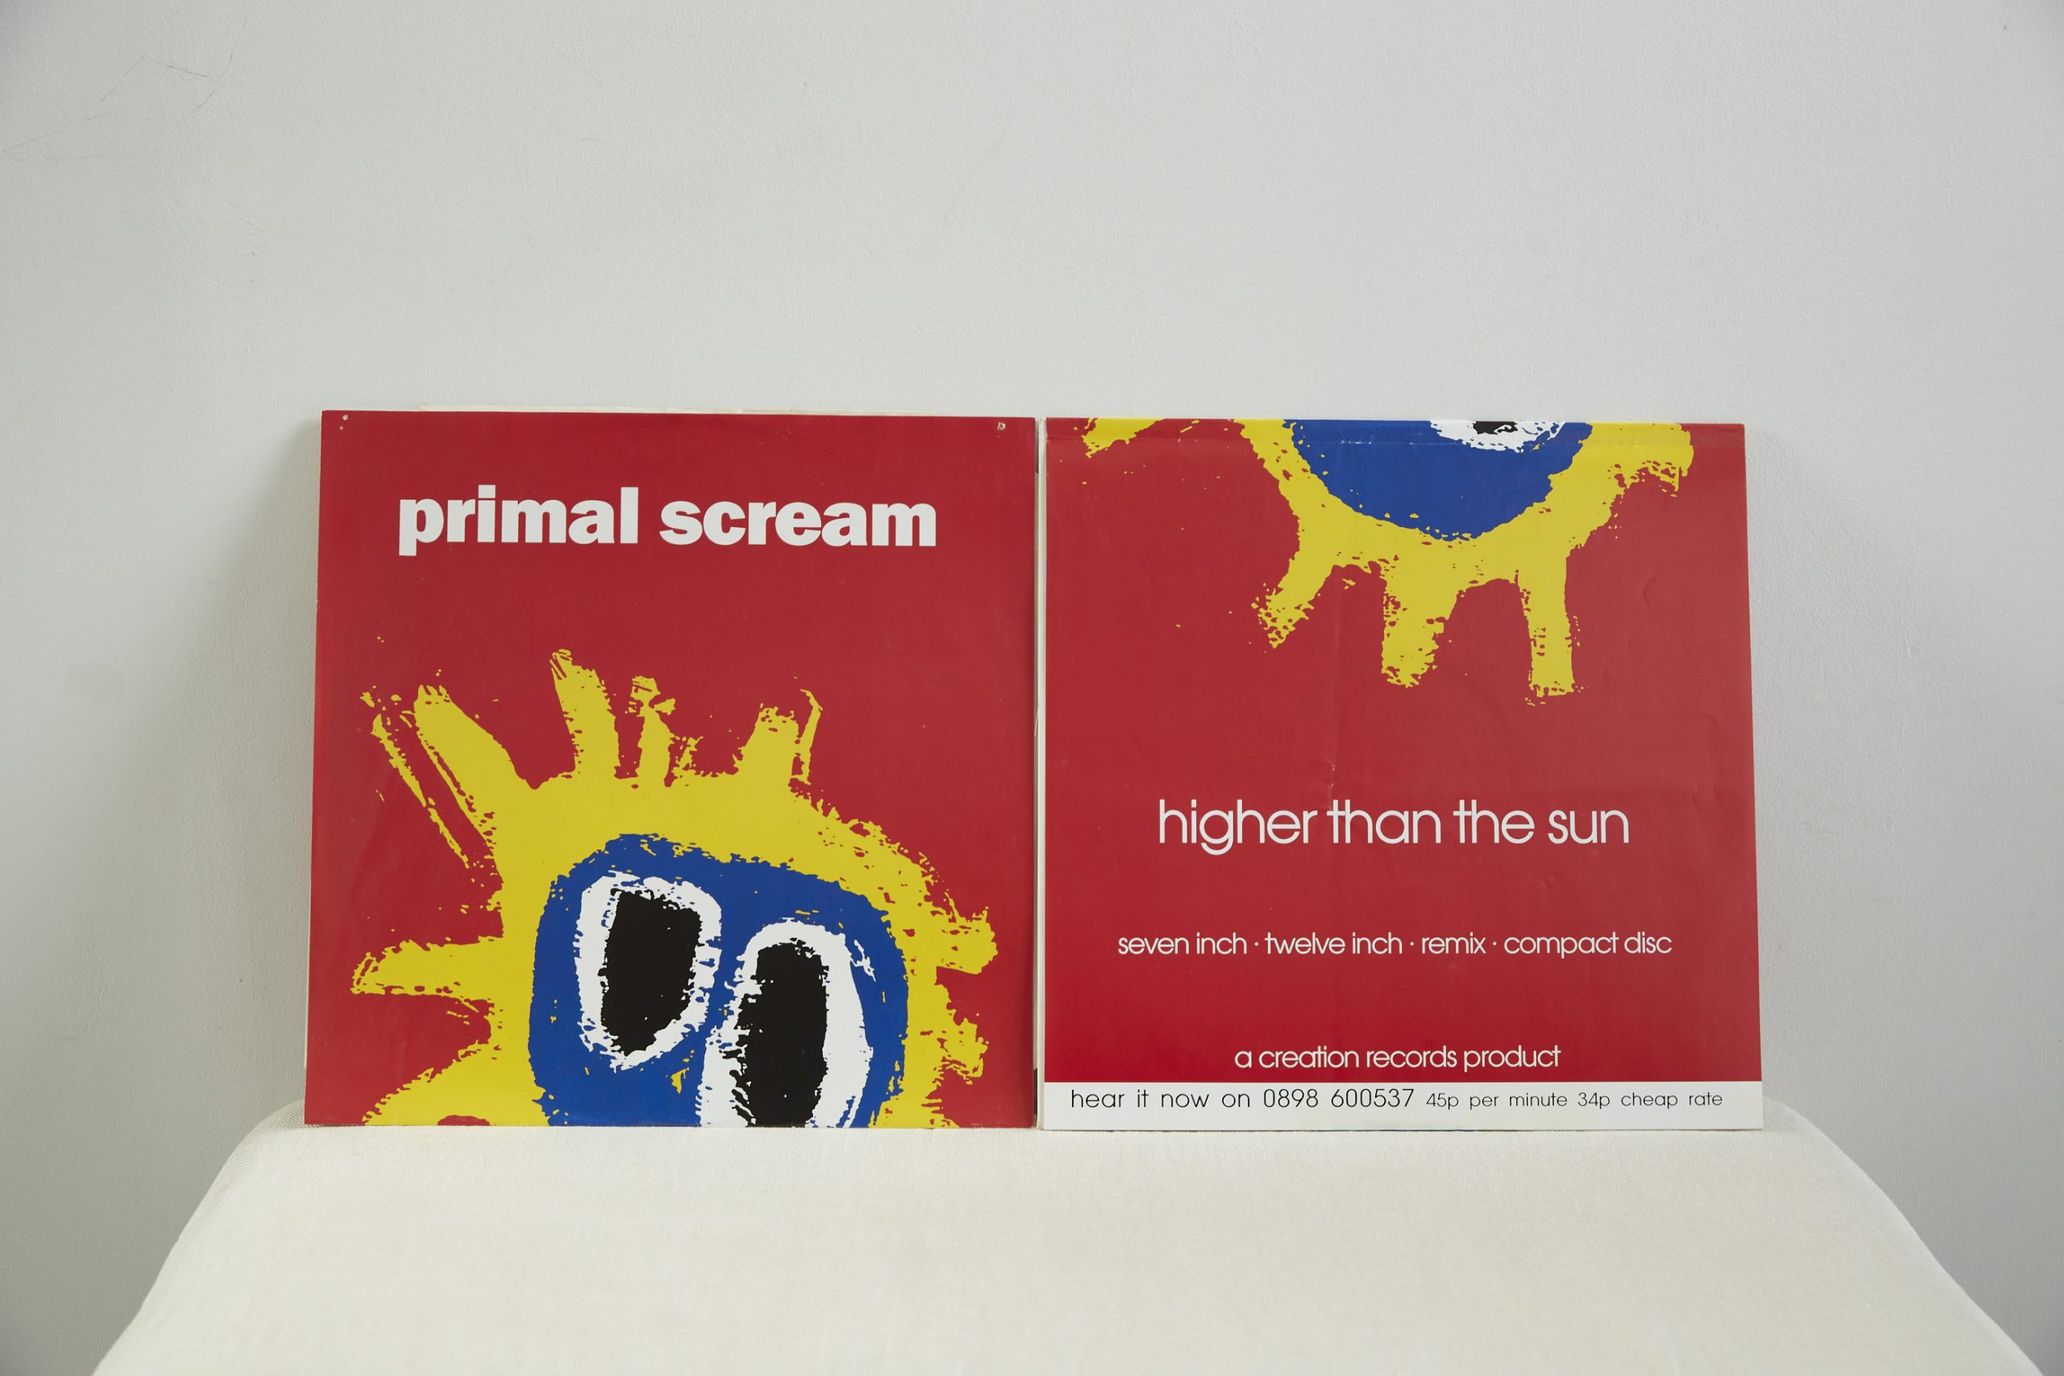 “Higher Than the Sun” promo edition. This poster’s design later became the Screamadelica cover.